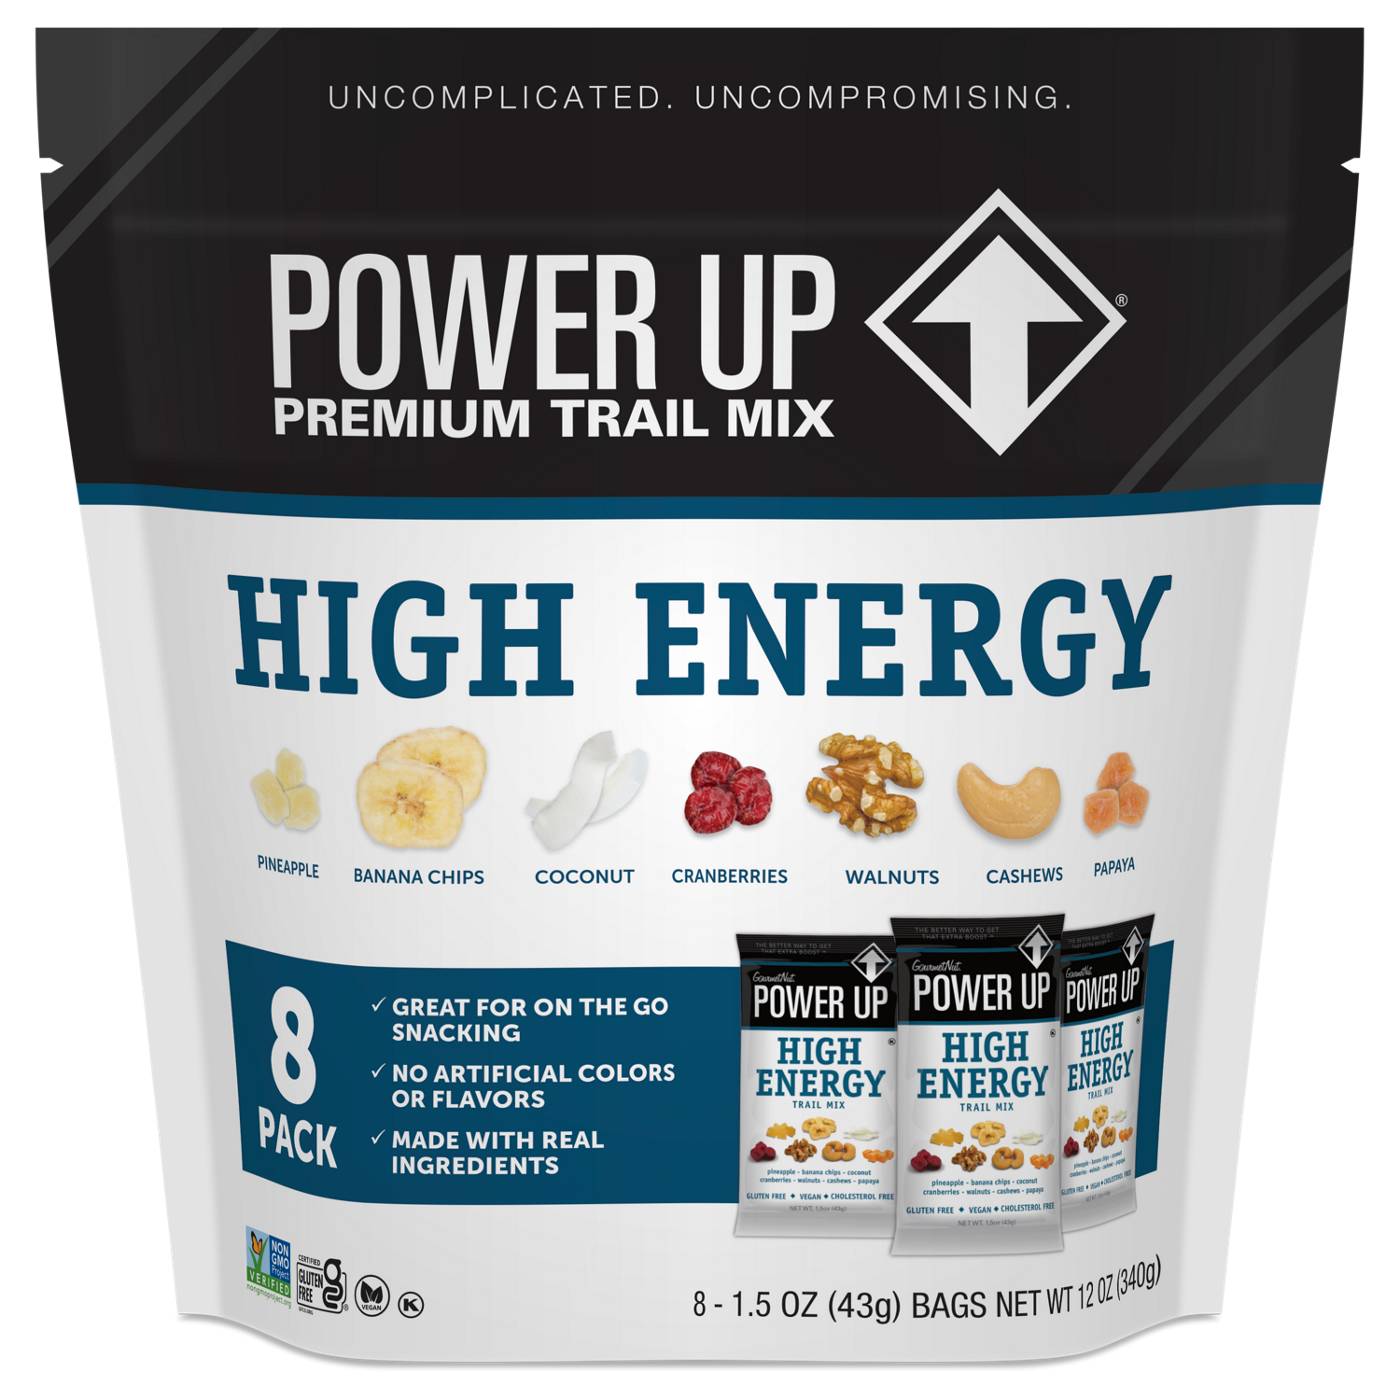 Power Up High Energy Trail Mix; image 1 of 3